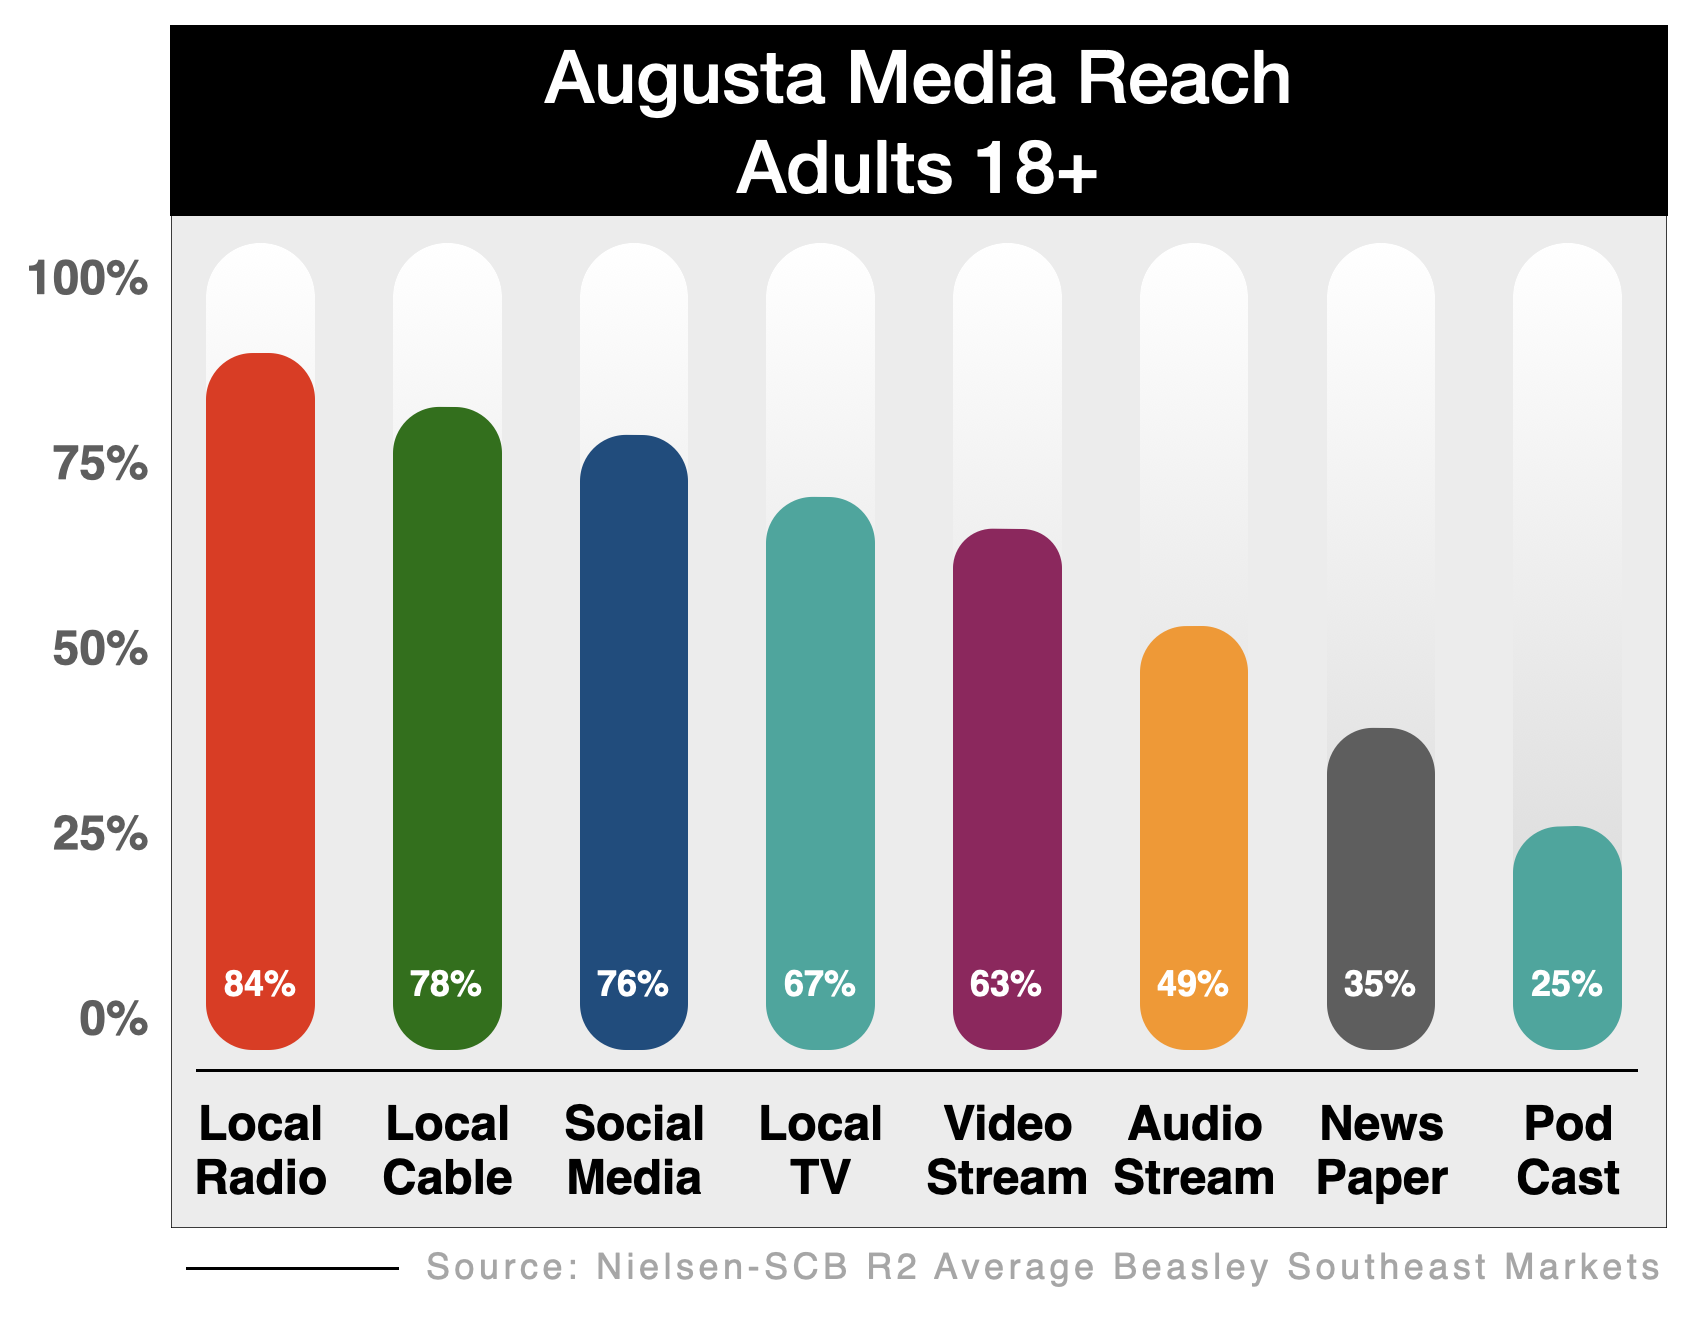 Advertise In Augusta Media Options (Reach) 2021